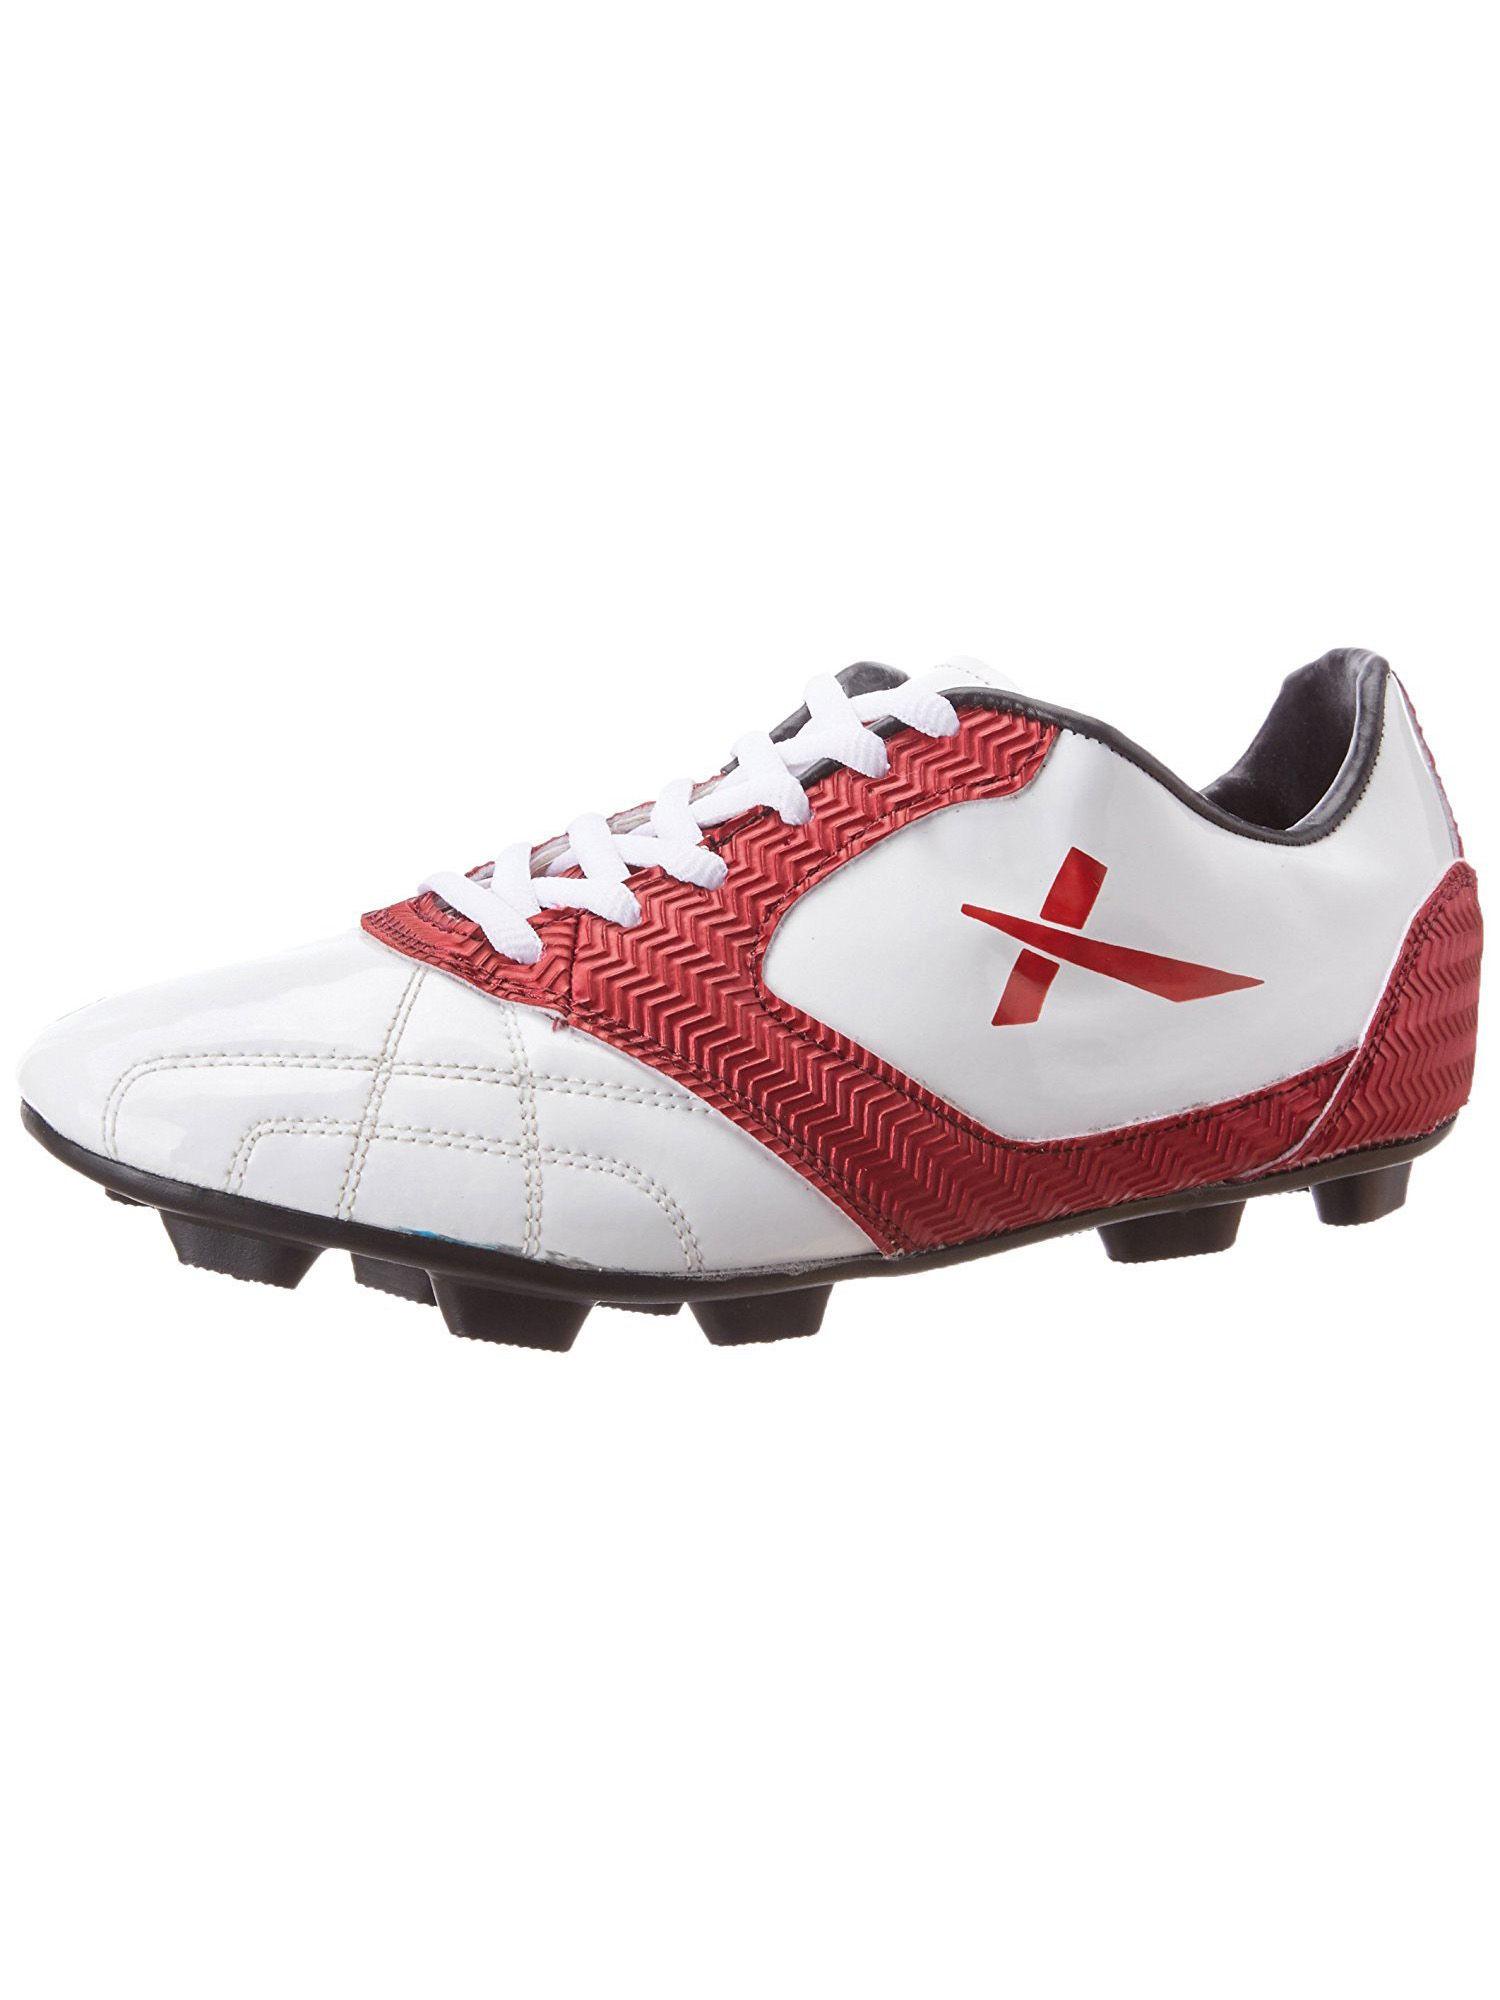 armour football shoes for men - white - maroon